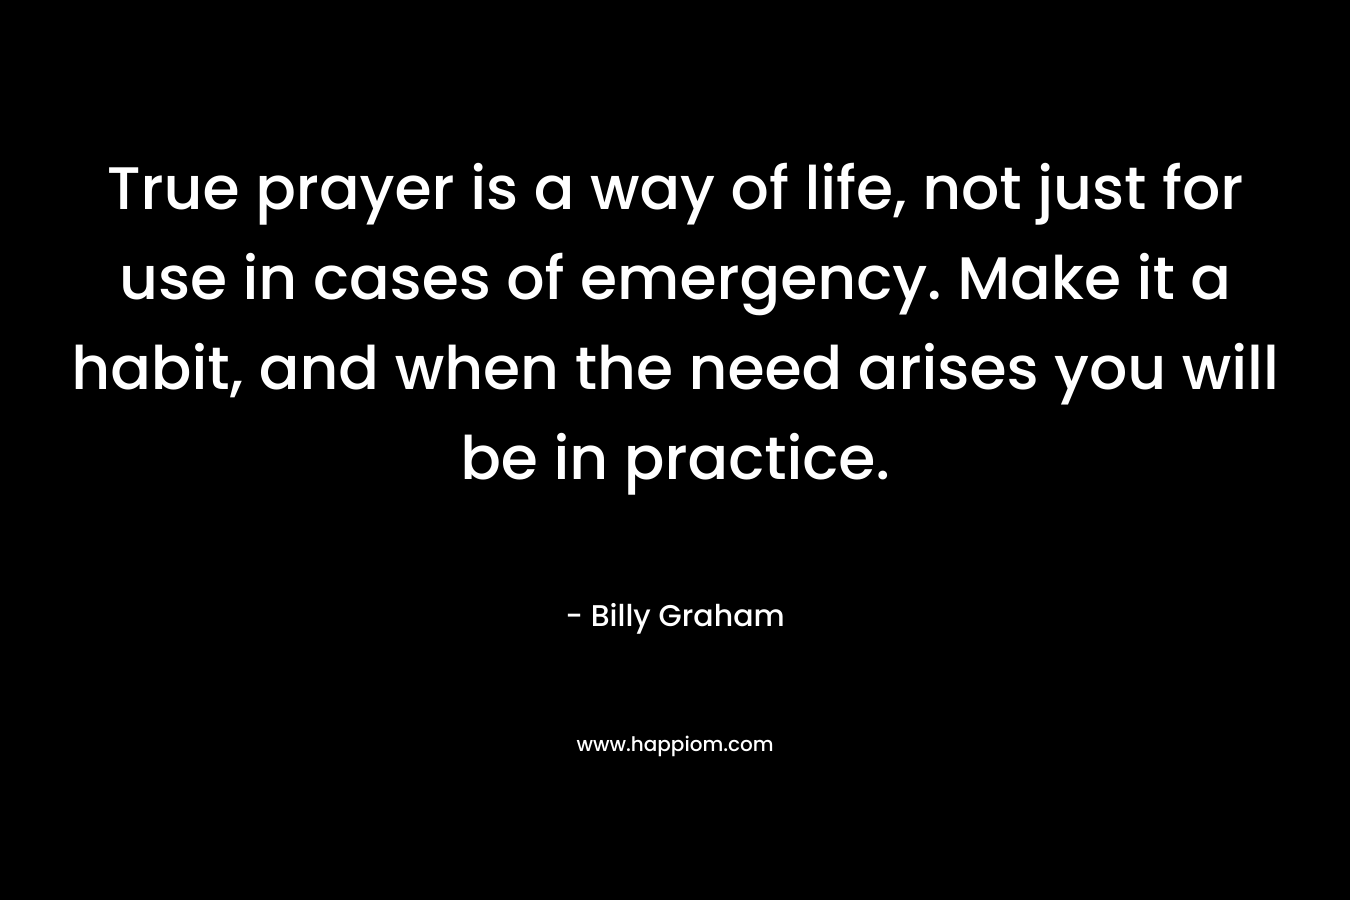 True prayer is a way of life, not just for use in cases of emergency. Make it a habit, and when the need arises you will be in practice.